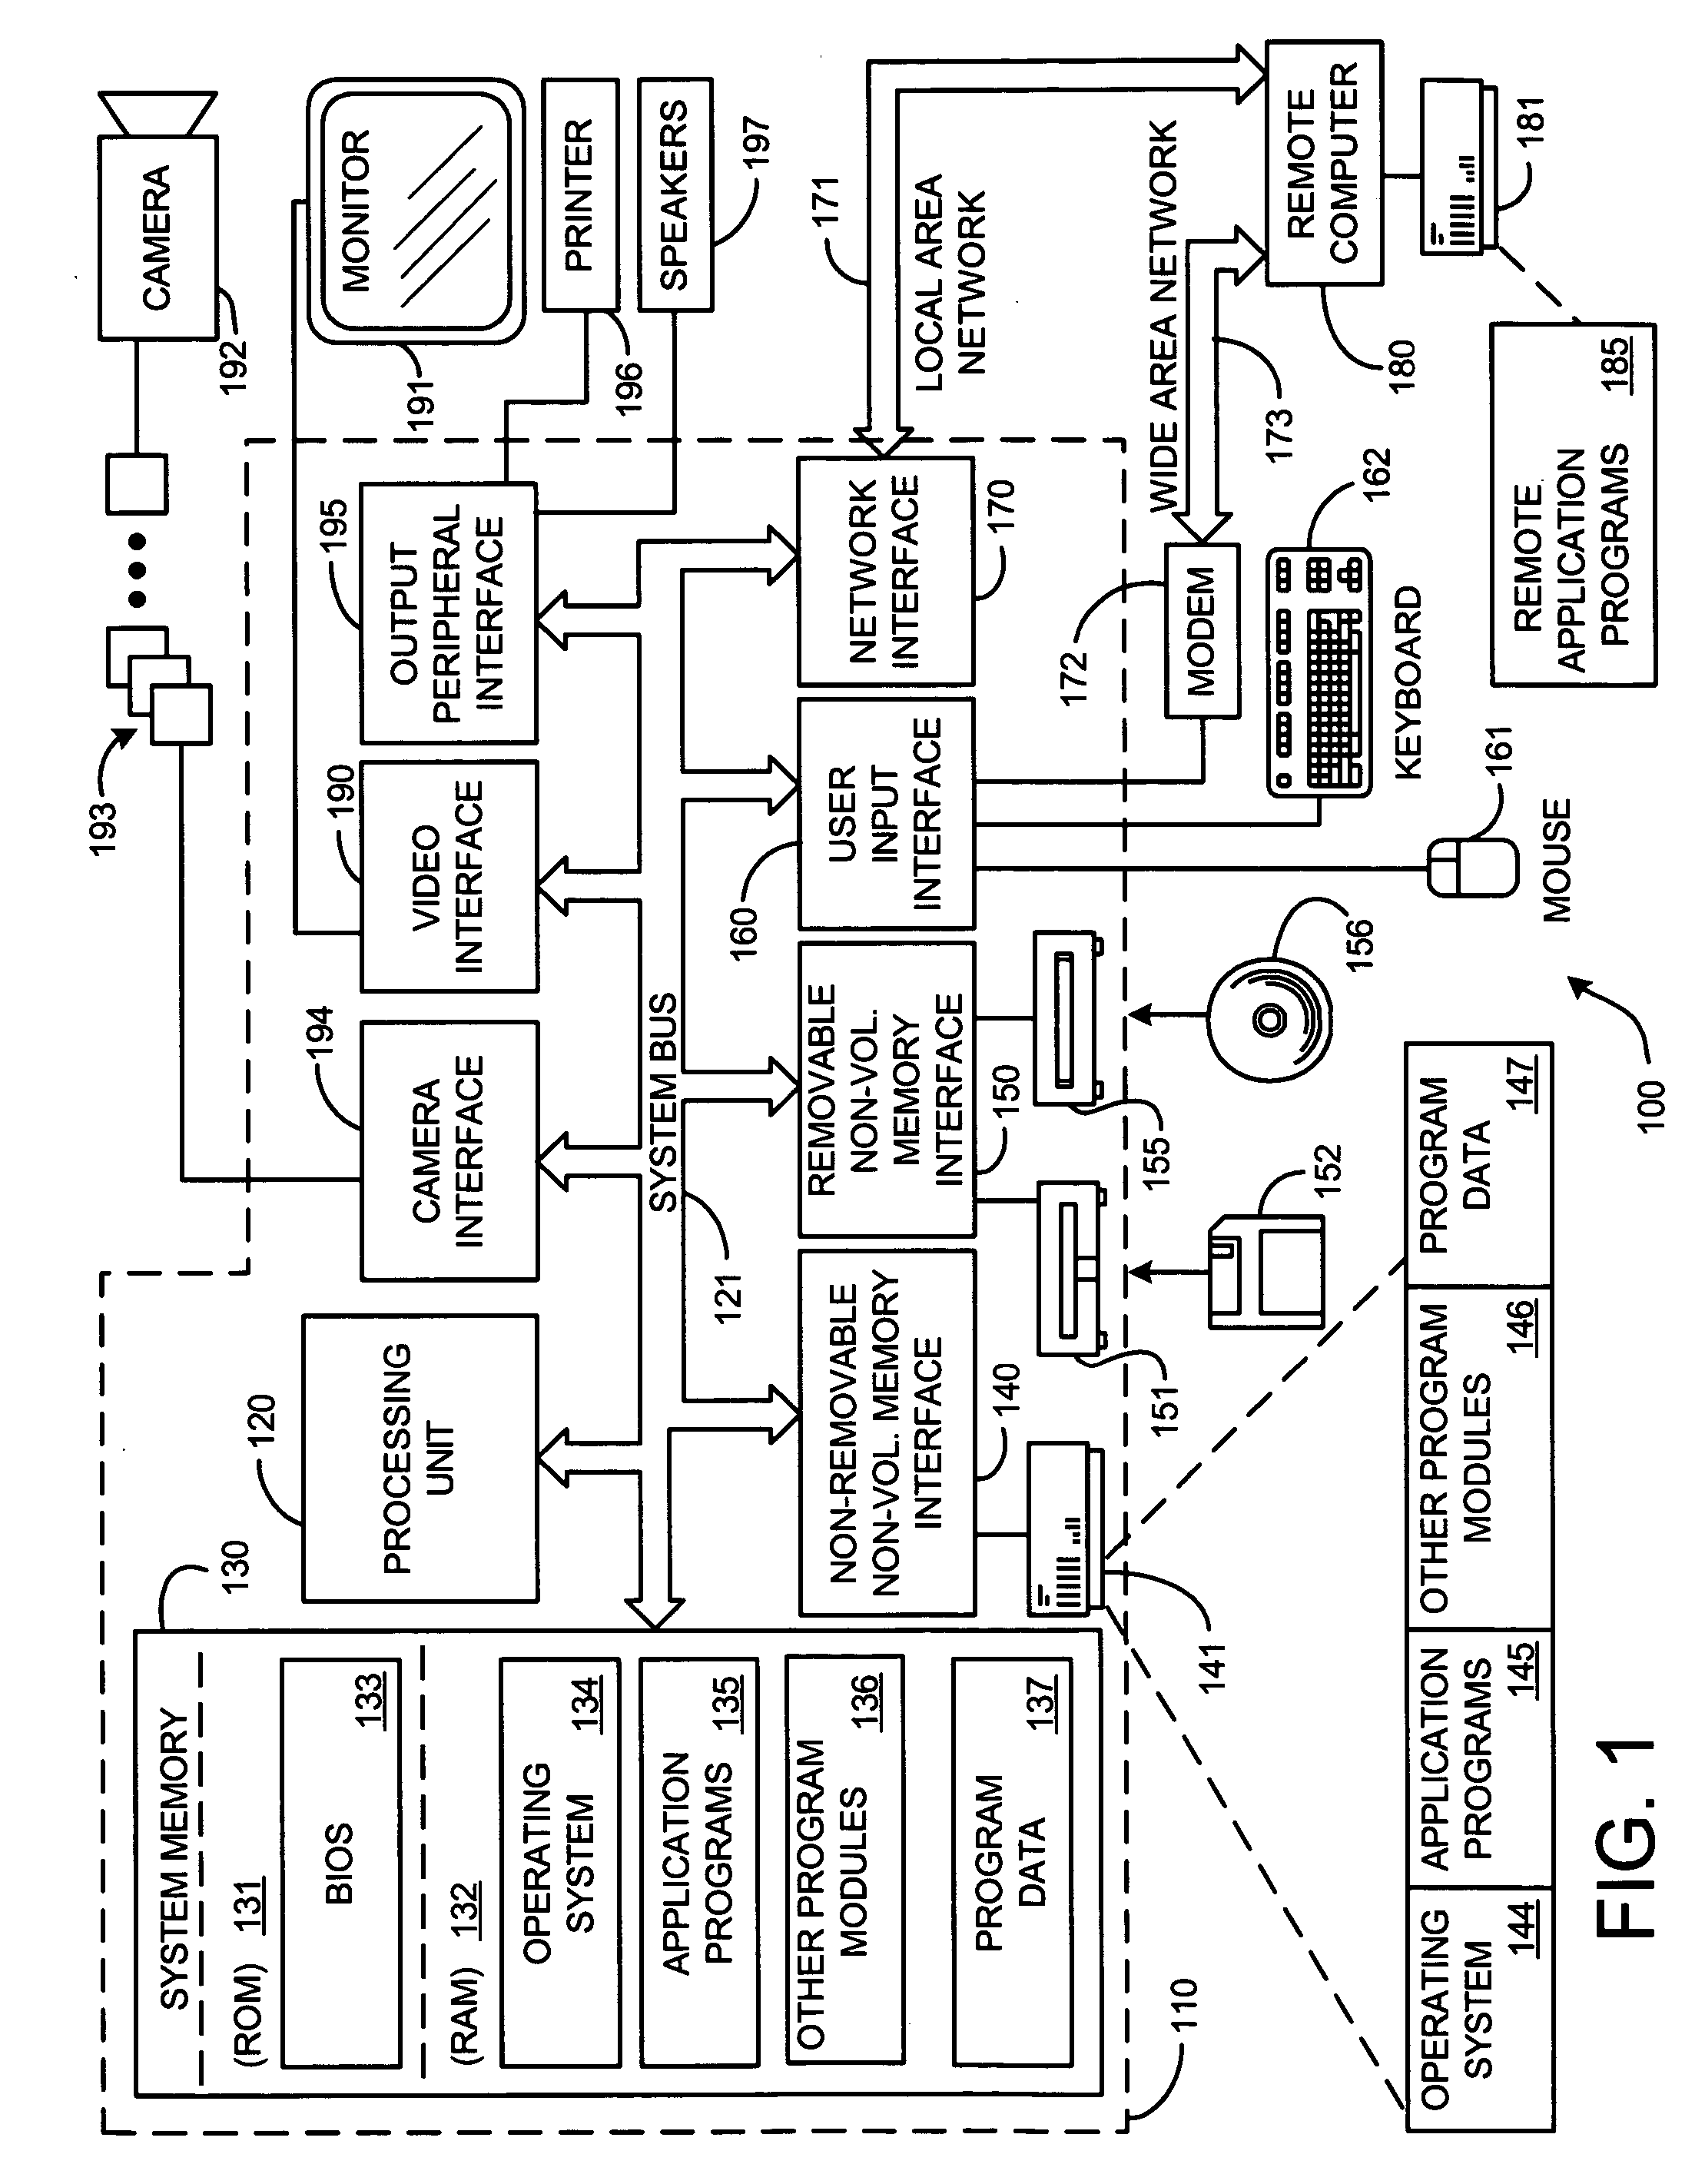 System and method for visual echo cancellation in a projector-camera-whiteboard system